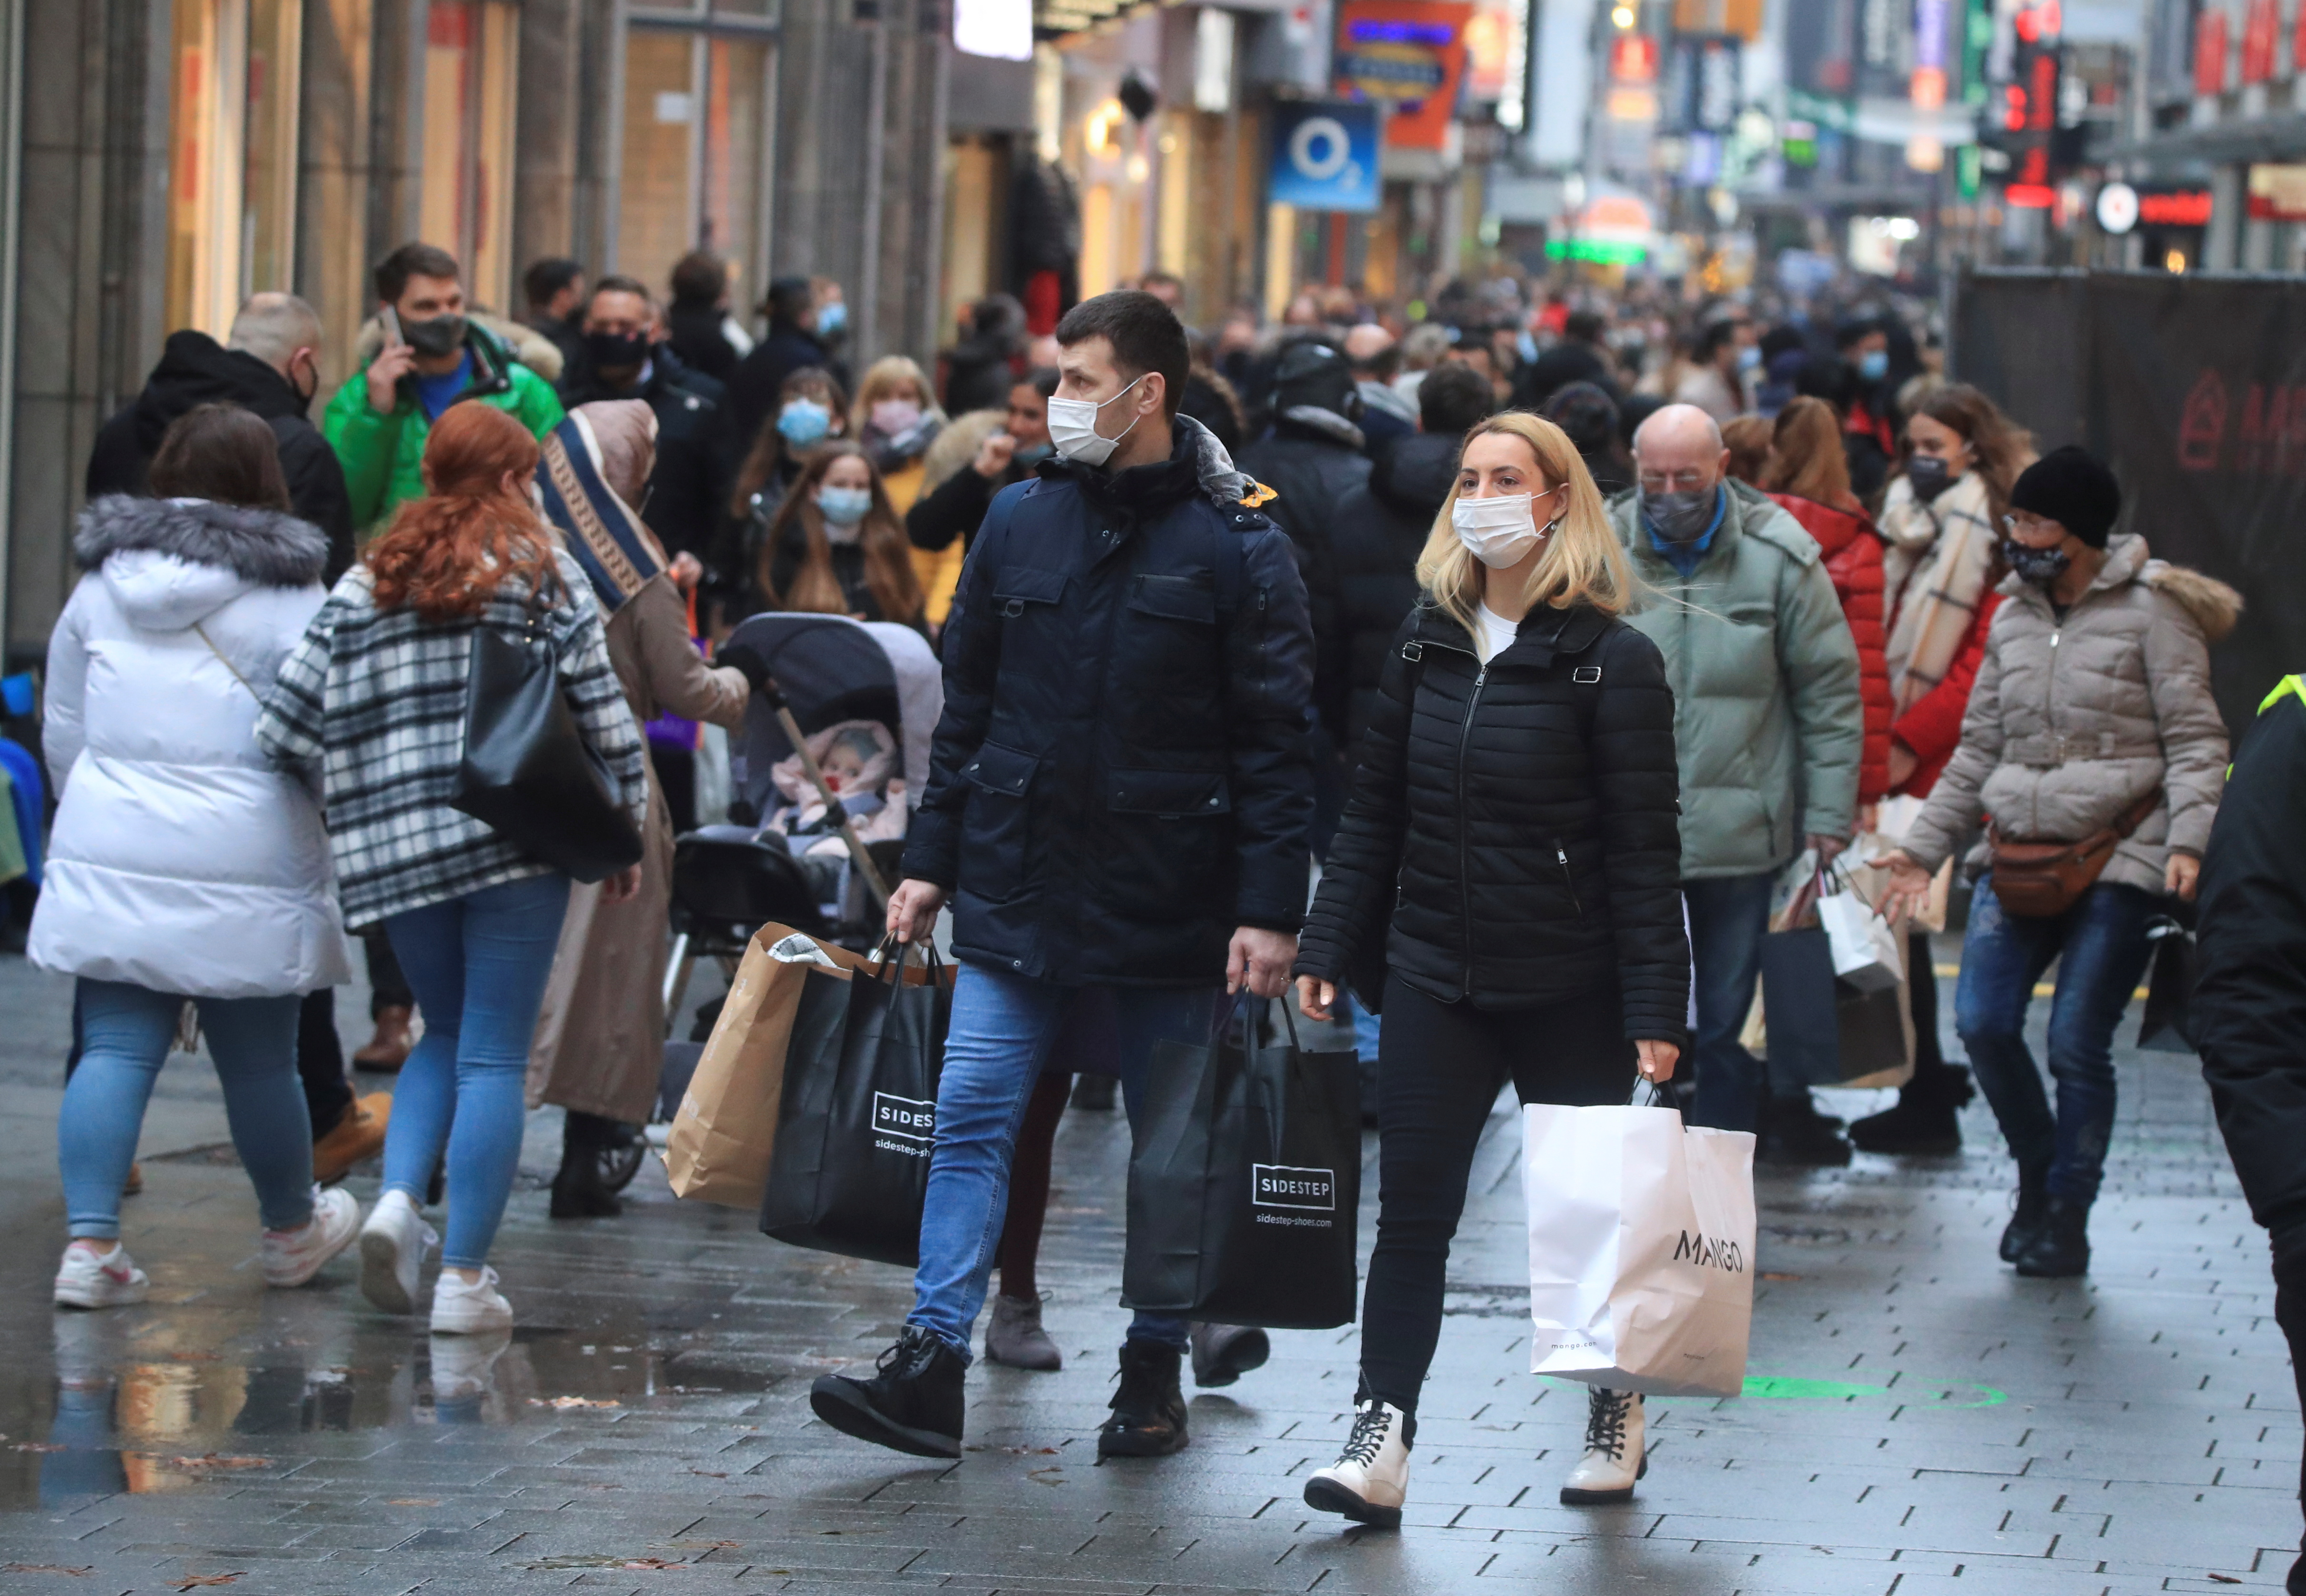 Cologne's shopping street crowded during the coronavirus pandemic